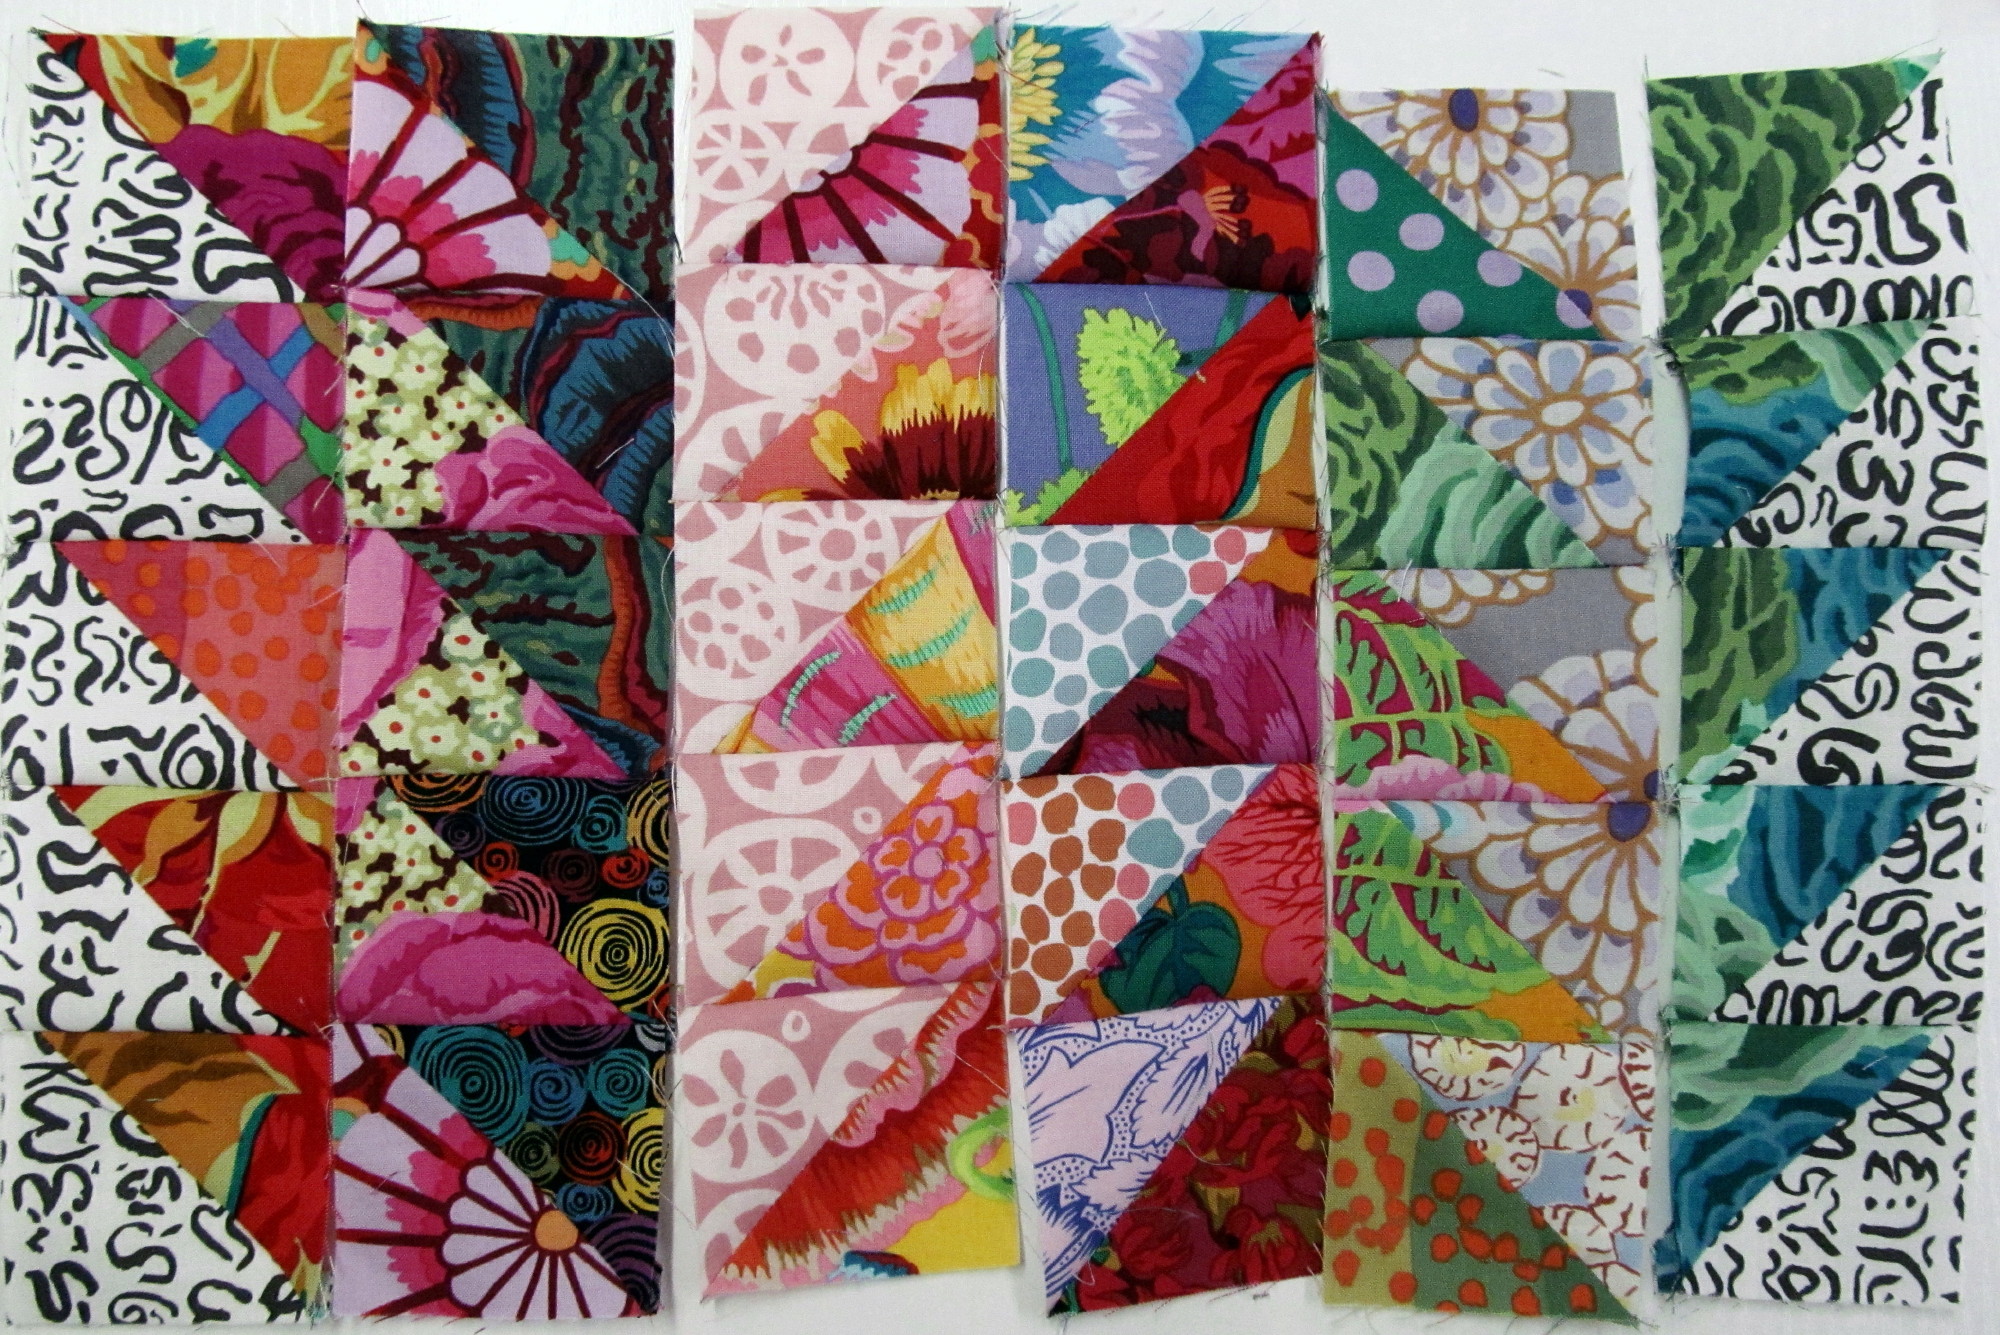 How to Join Quilt Blocks as You Go TUTORIAL